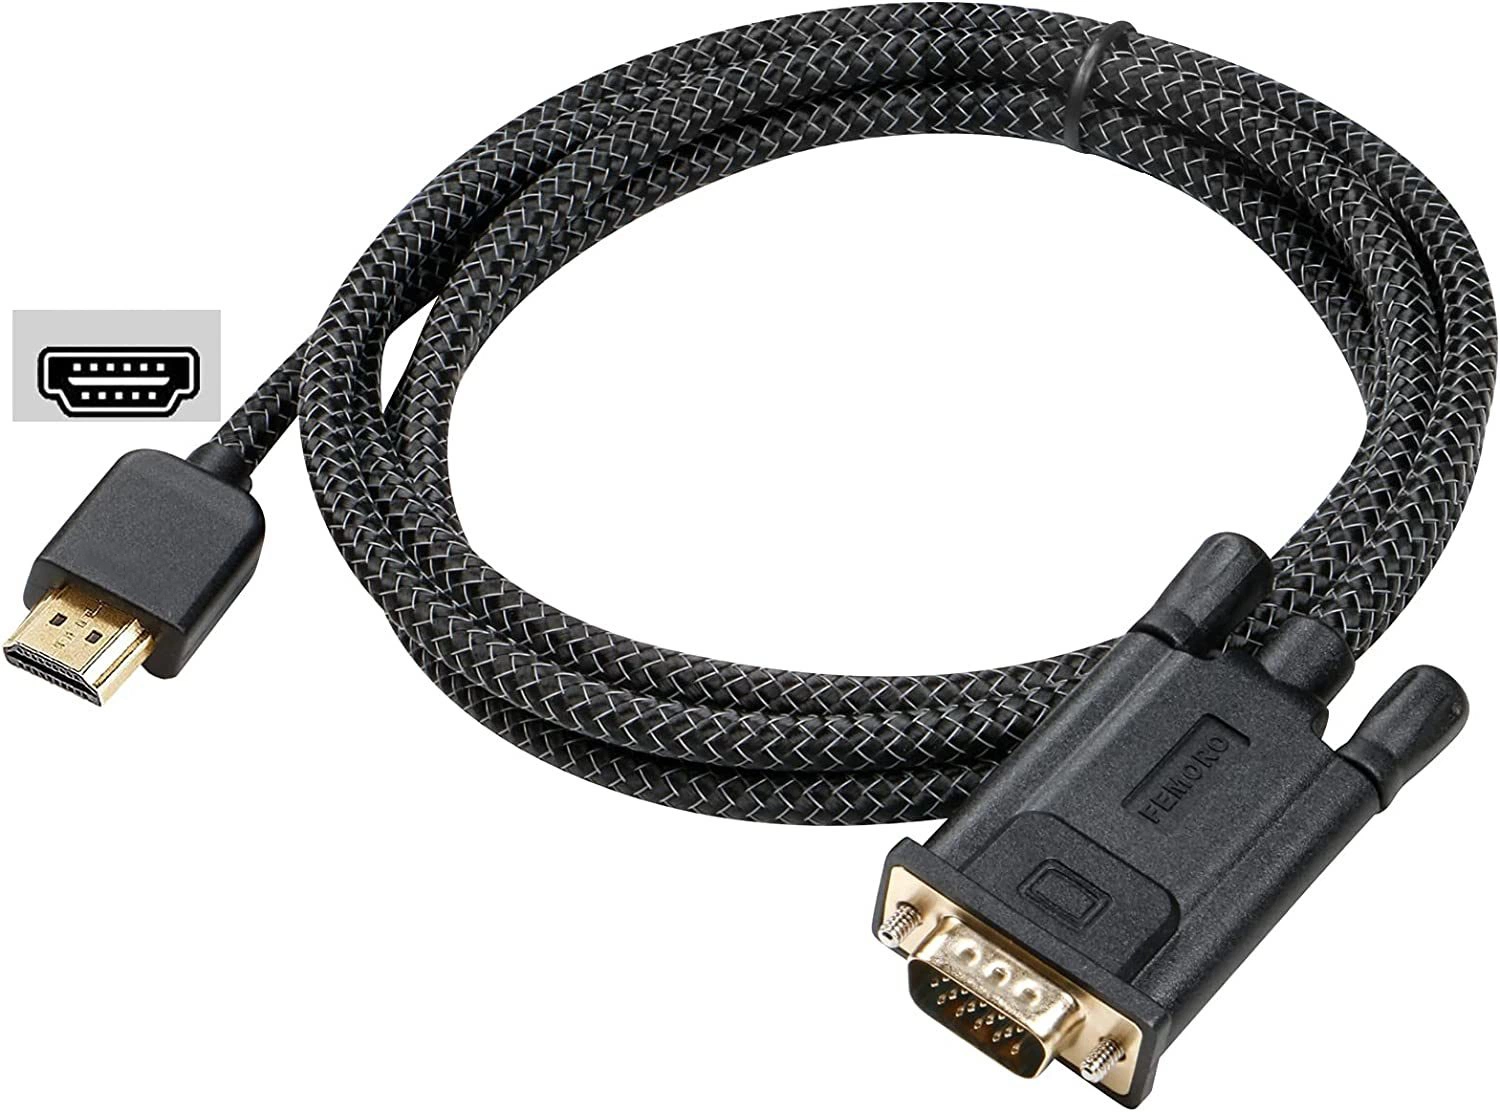 HD to VGA Cable 6 Feet Male to Male Braided Cord 1080P@60Hz for Monitor, Computer, Desktop, Laptop, PC, Projector, HDTV, Game and More